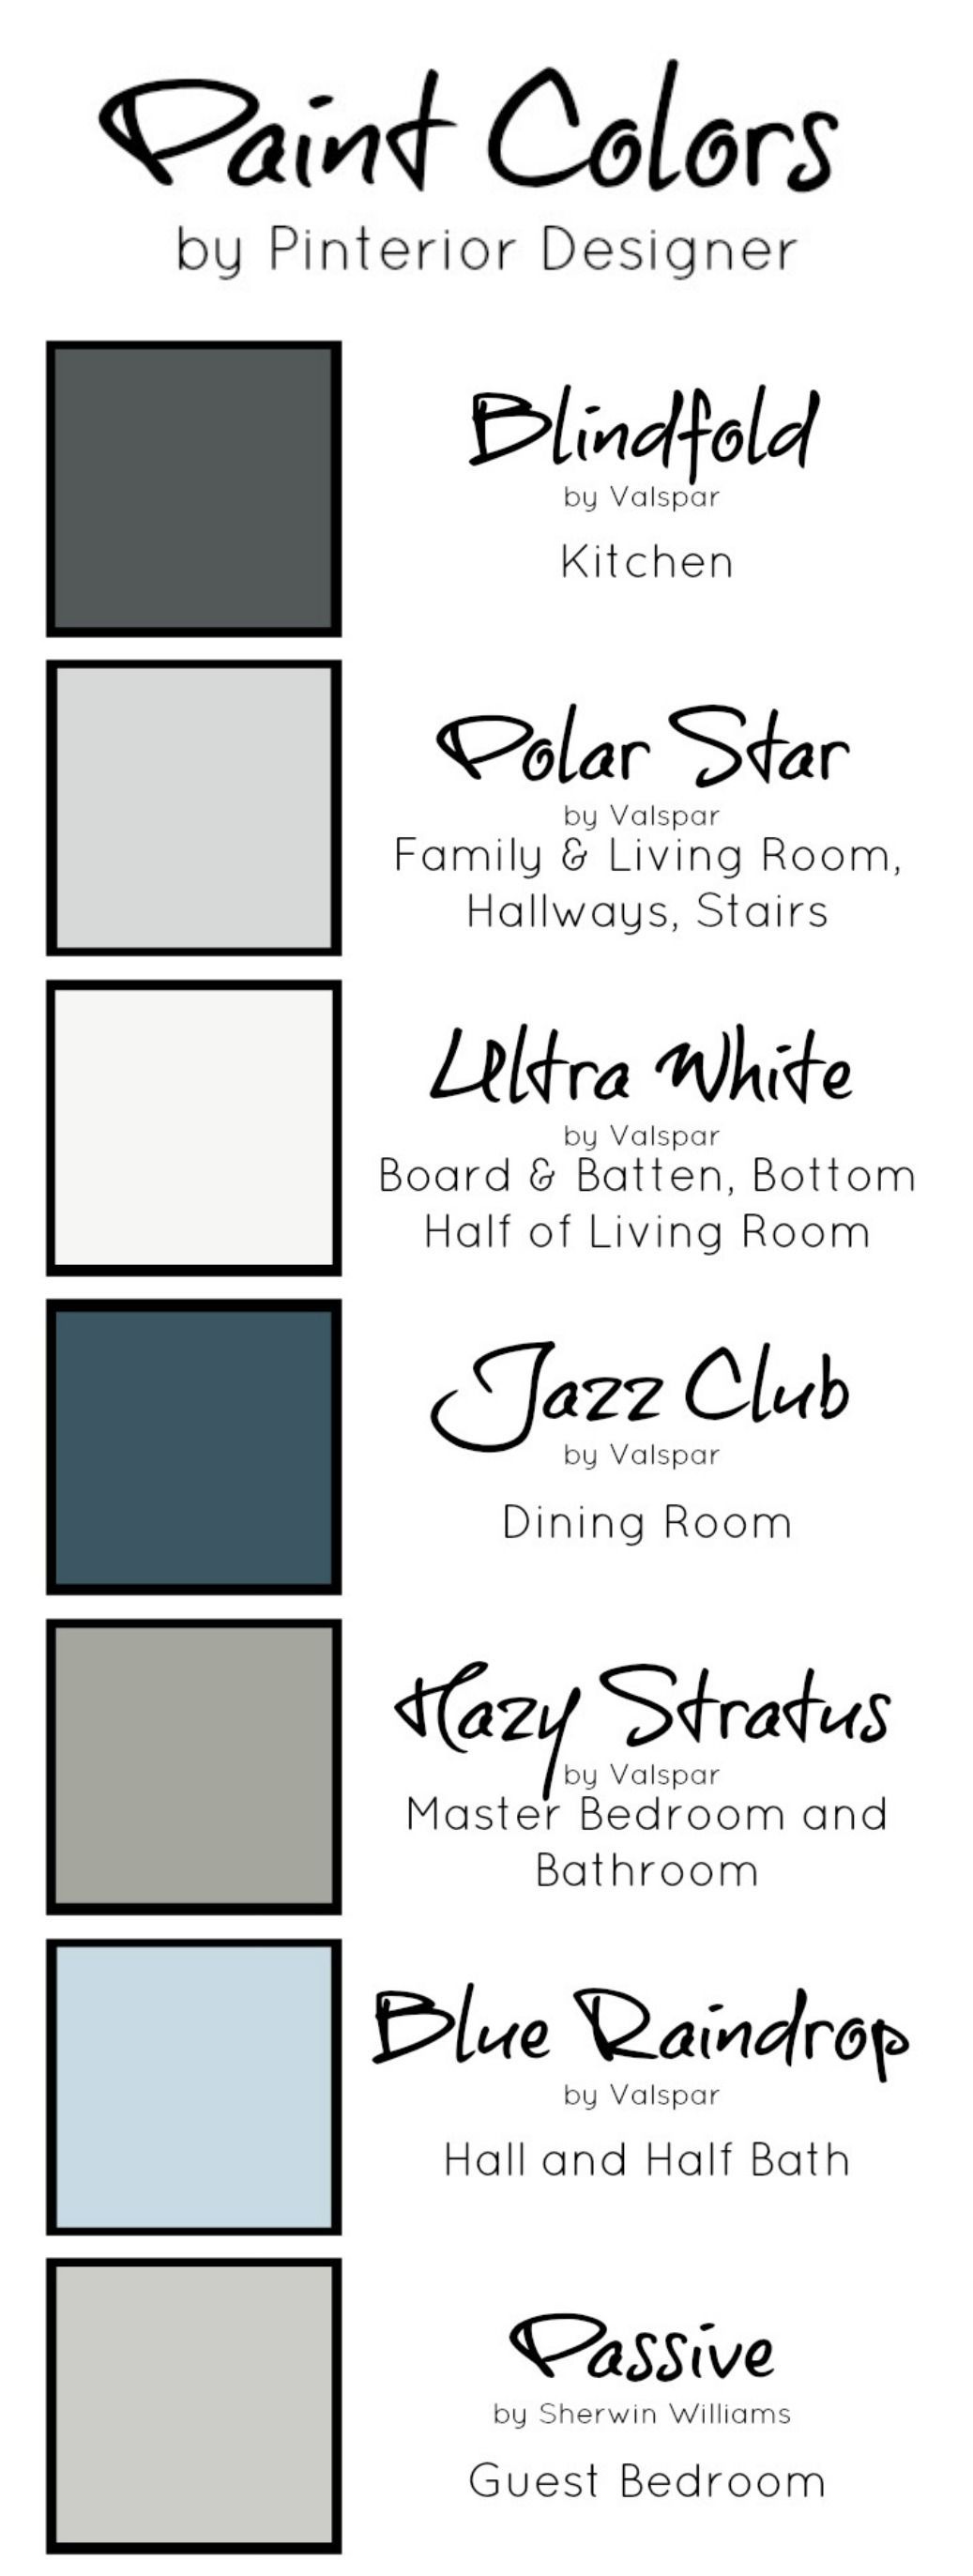 Love these colors! Perfect mix of neutral grays and blues for a cool color schem